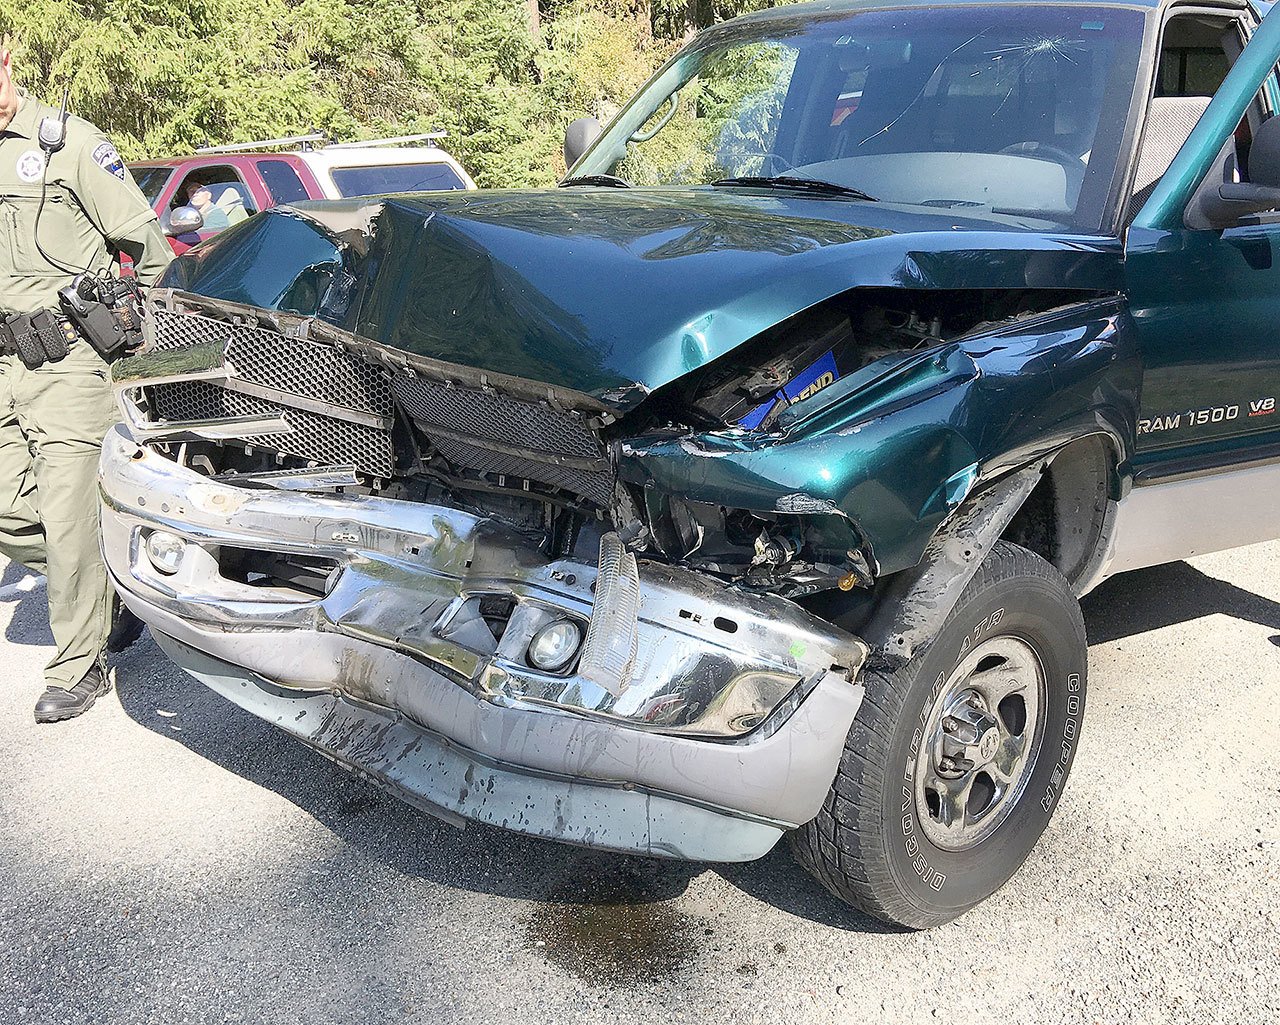 Bill Beezley/East Jefferson Fire-Rescue                                A Dodge Ram left the scene of an accident Tuesday afternoon on South Discovery Road and was located at Cape George Road and Nelson’s Landing.